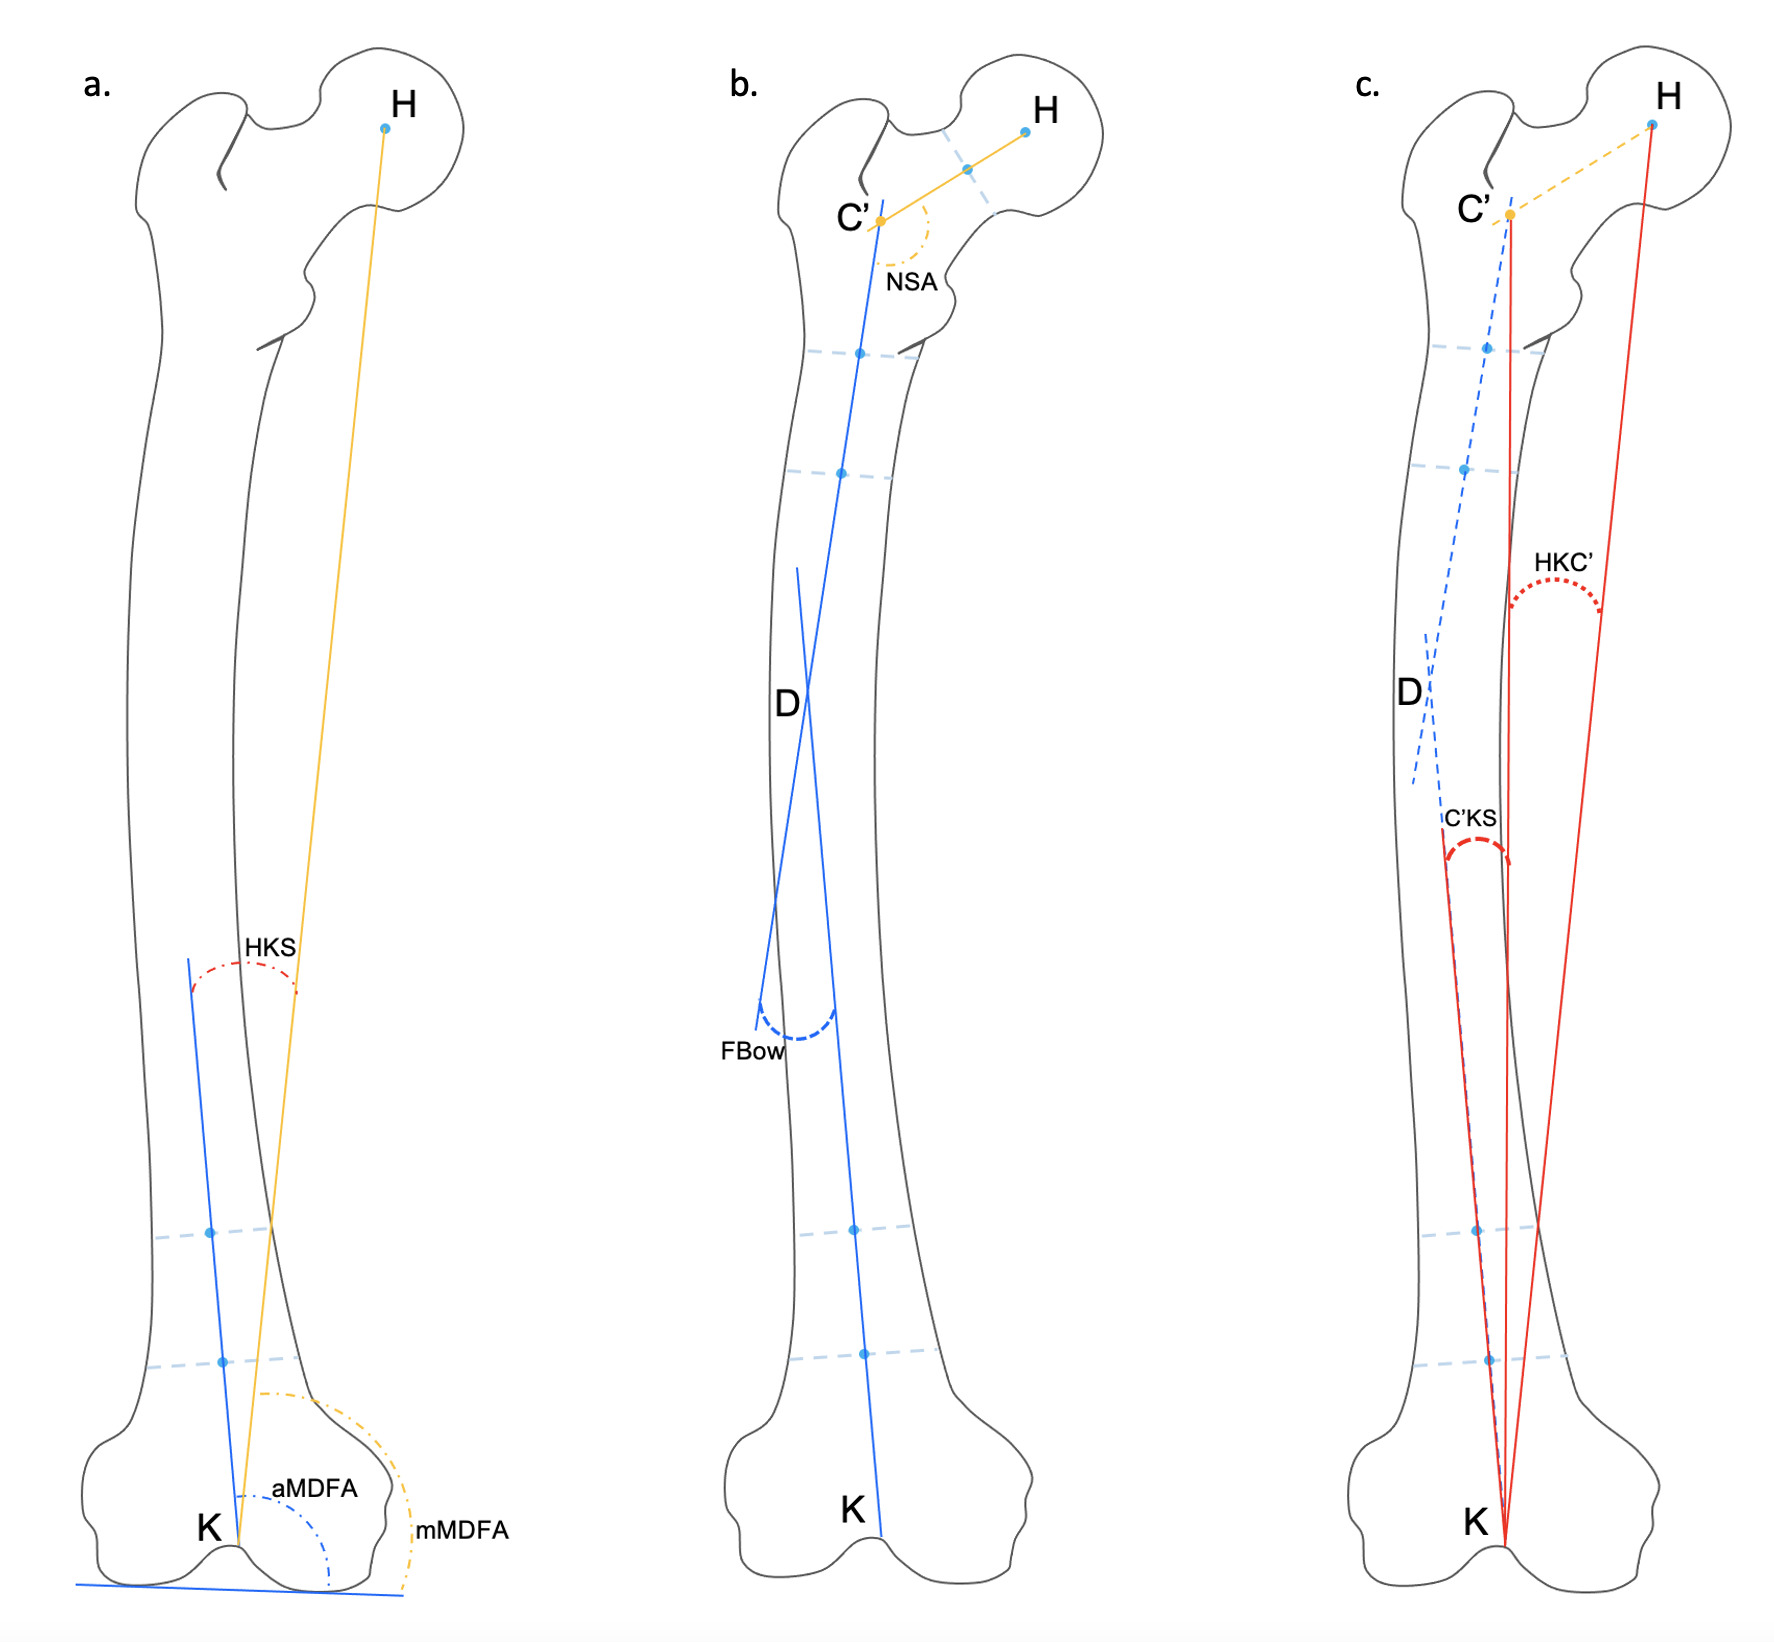 Fig. 2 
            Femoral radiological measurements performed on the preoperative full long-leg radiograph for each patient. aMDFA, anatomical medial distal femoral angle; C'KS angle (angle between the distal femoral shaft axis and the line joining C’ and the knee centre K); FBow, femoral bowing angle; HKC’ angle (angle between the mechanical axis line of the femur and the line joining C’ and the knee centre K); HKS, hip knee shaft angle; mMDFA, mechanical medial distal femoral angle; NSA, femoral neck shaft angle.
          